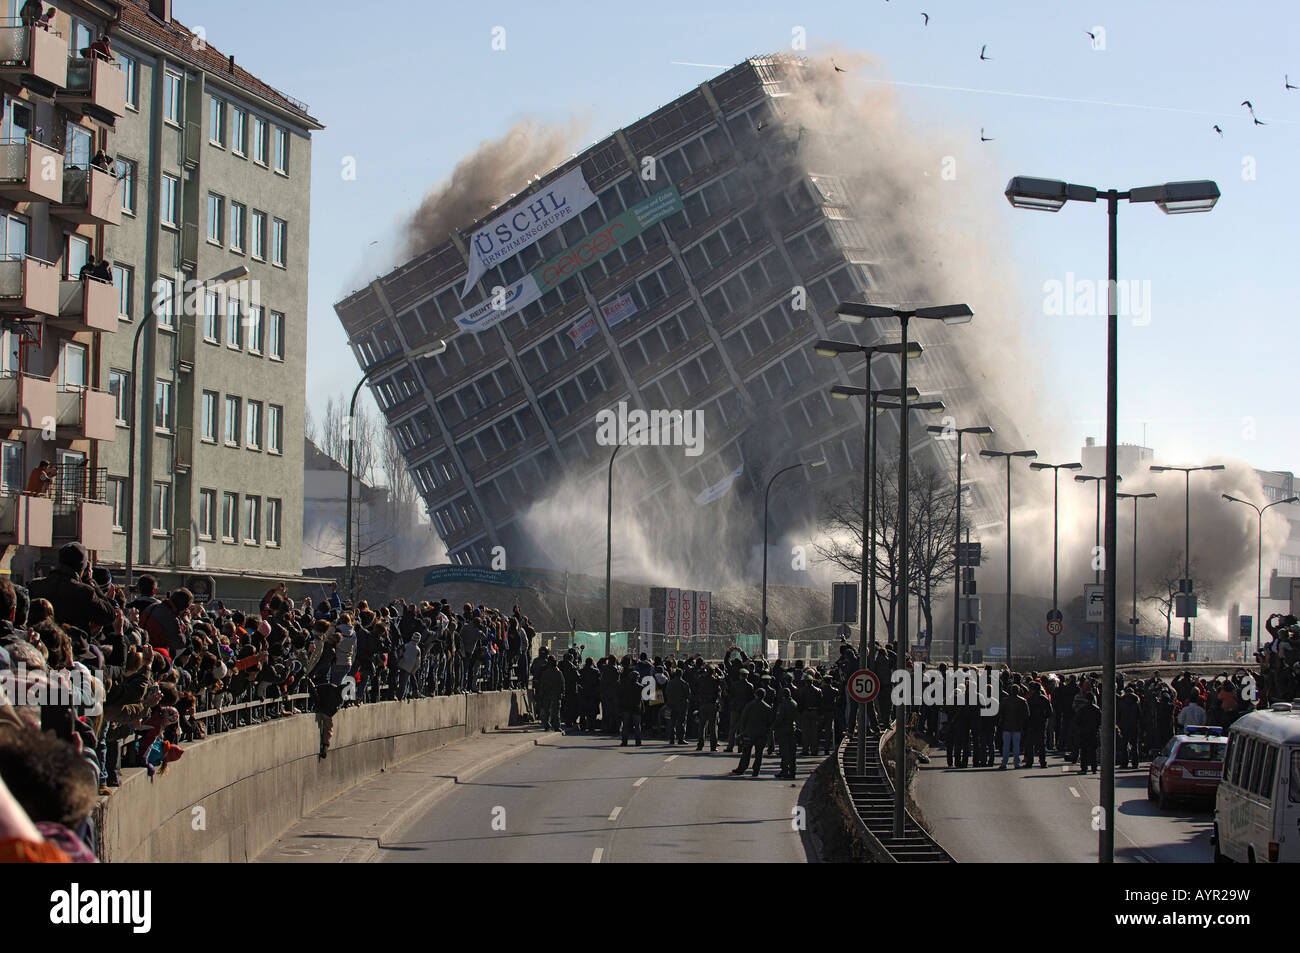 Blowing up the Agfa building, Munich, Upper Bavaria, Bavaria, Germany Stock Photo